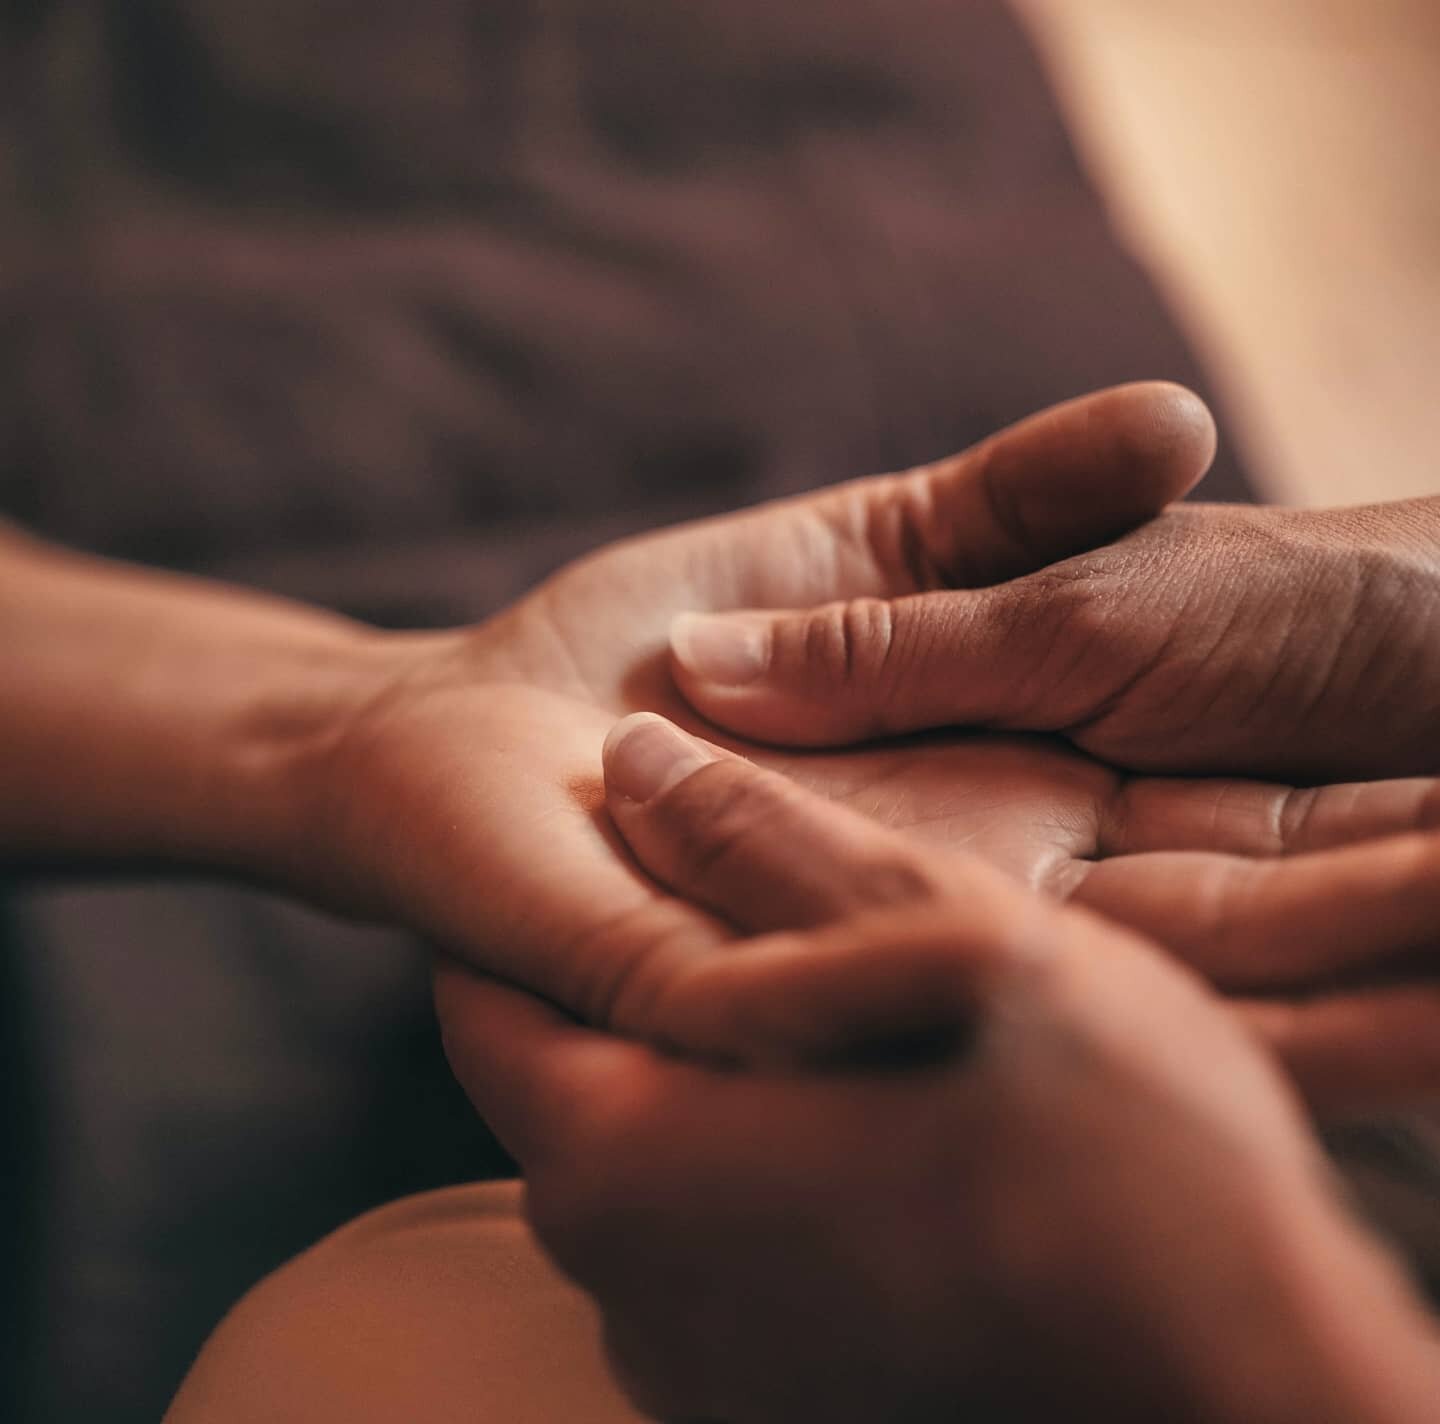 The power of touch...

Never underestimate the healing power of touch. It helps release thoes happy endorphins which make everything so much better. Massage isn't just about relaxation and stress relief but sometimes it's about connection. A good mas